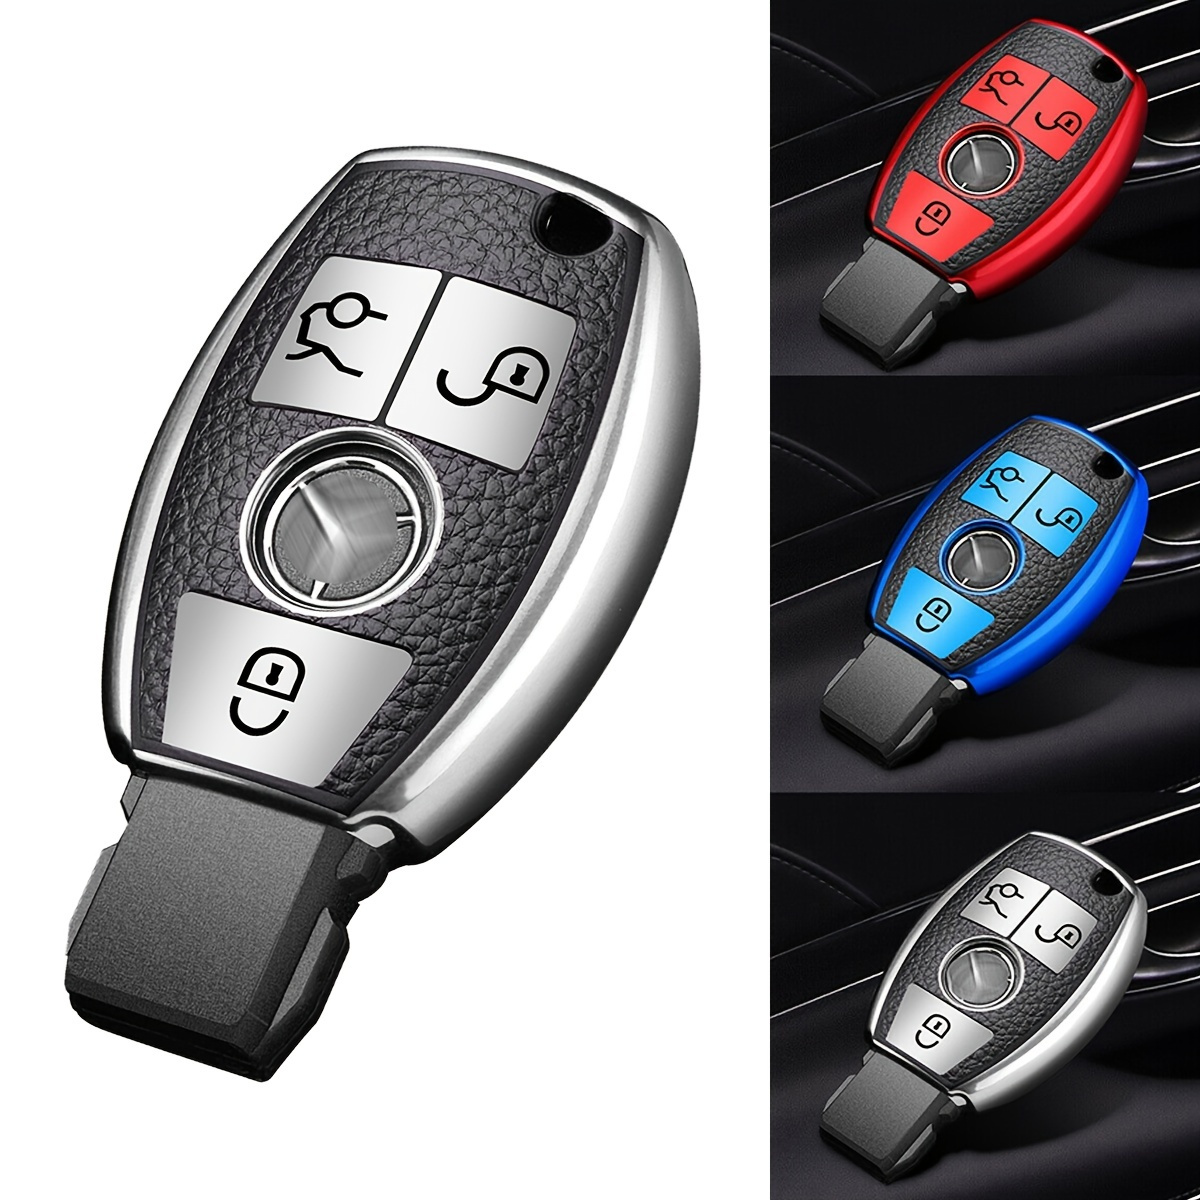 Leather key fob cover case fit for Toyota T3 remote key, 19,95 €